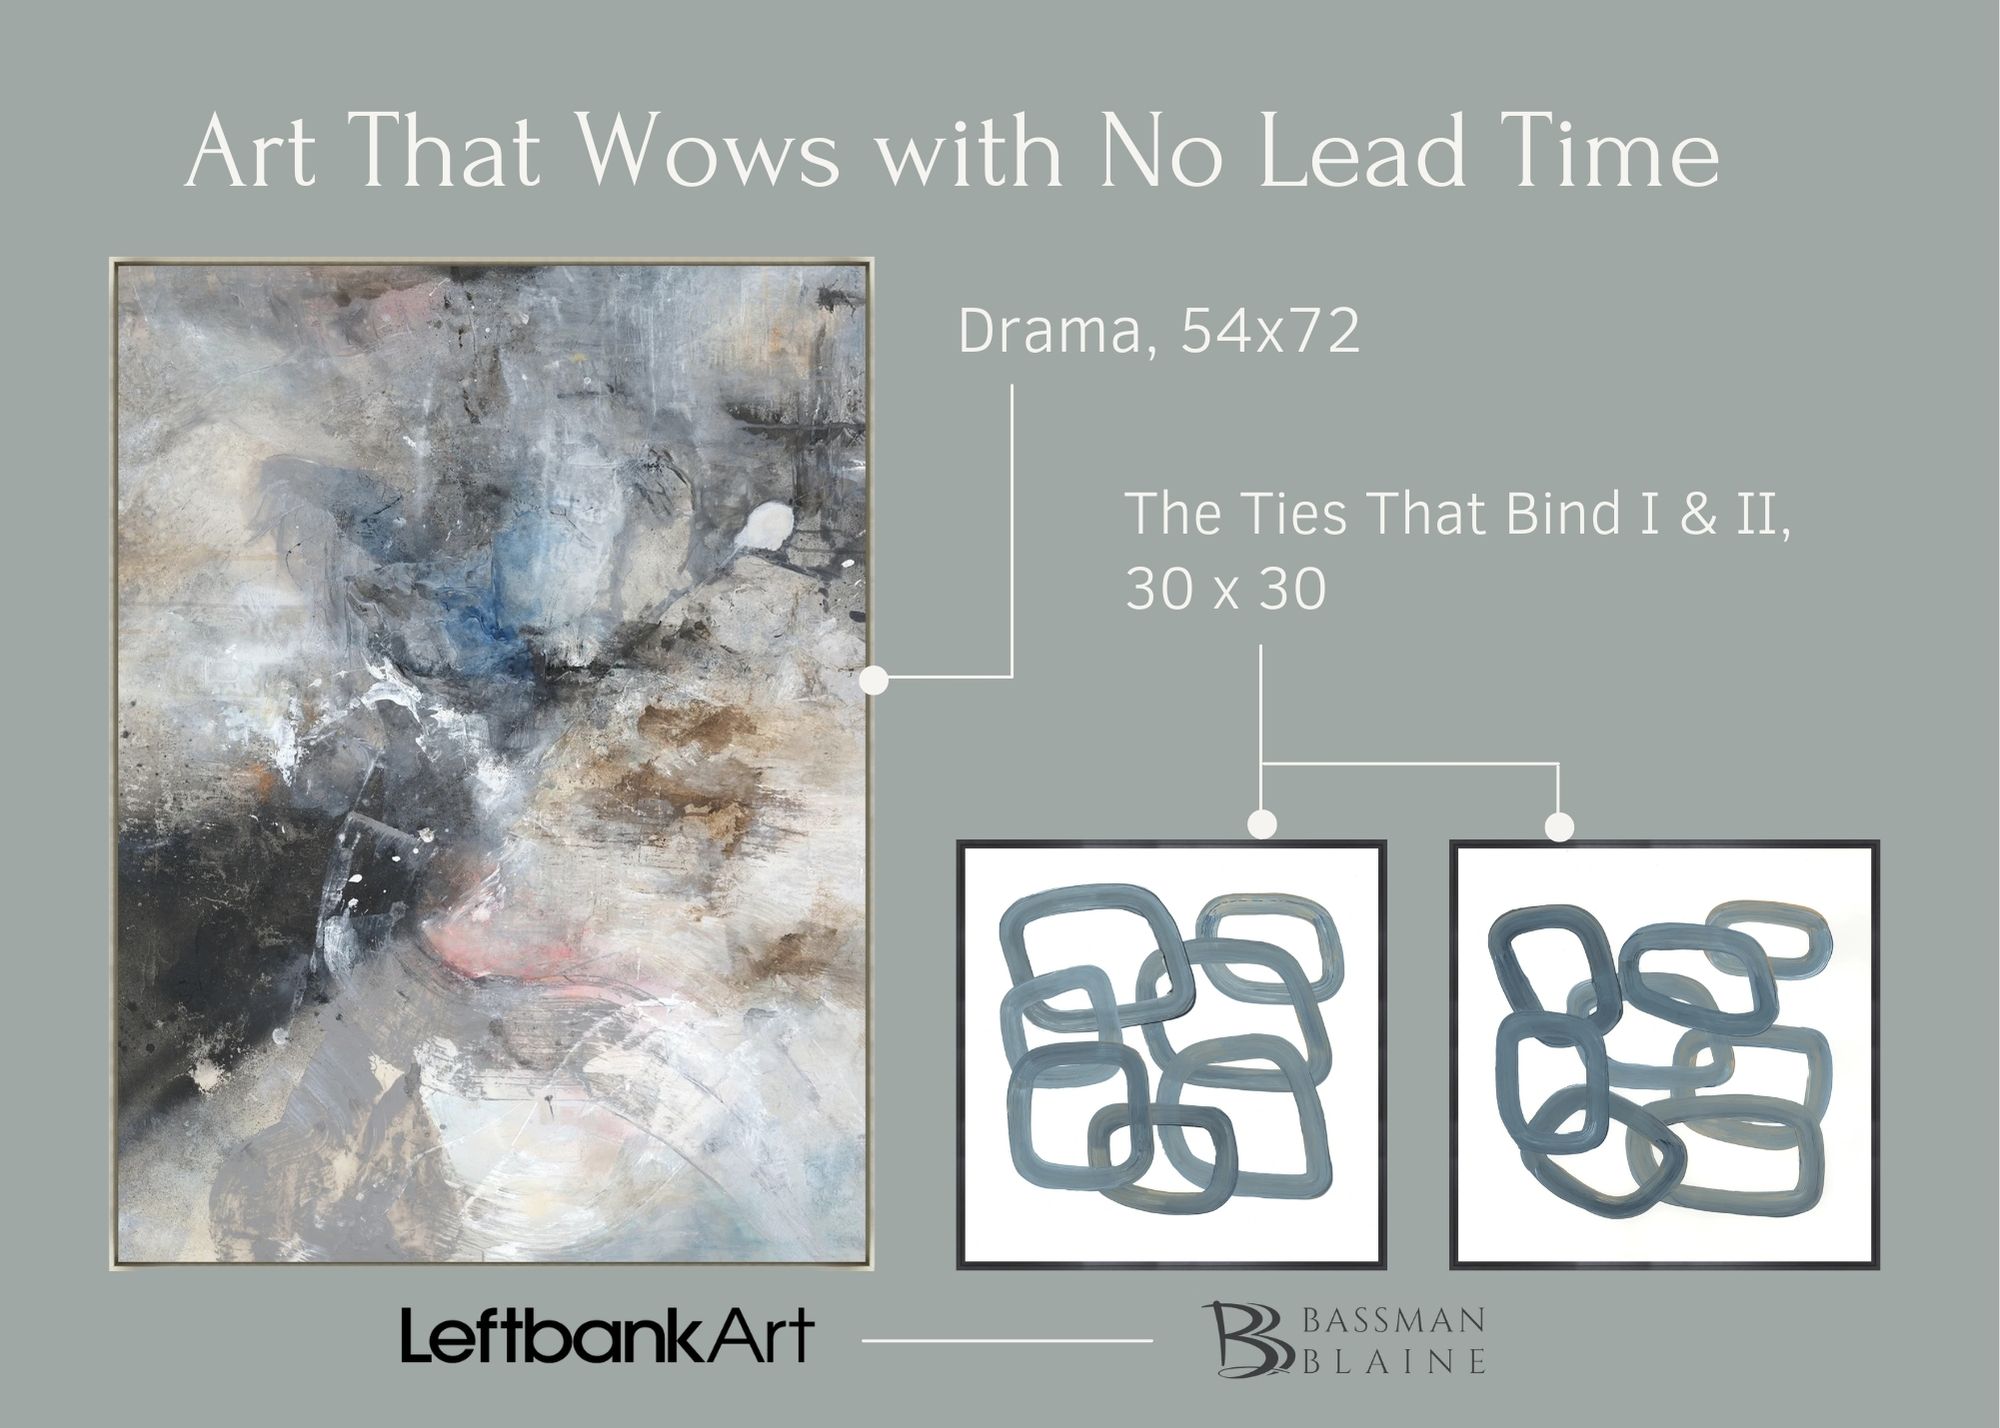 Swoonworthy Pieces by Leftbank Art with No Lead Time at Bassman Blaine - News from Laguna Design Center